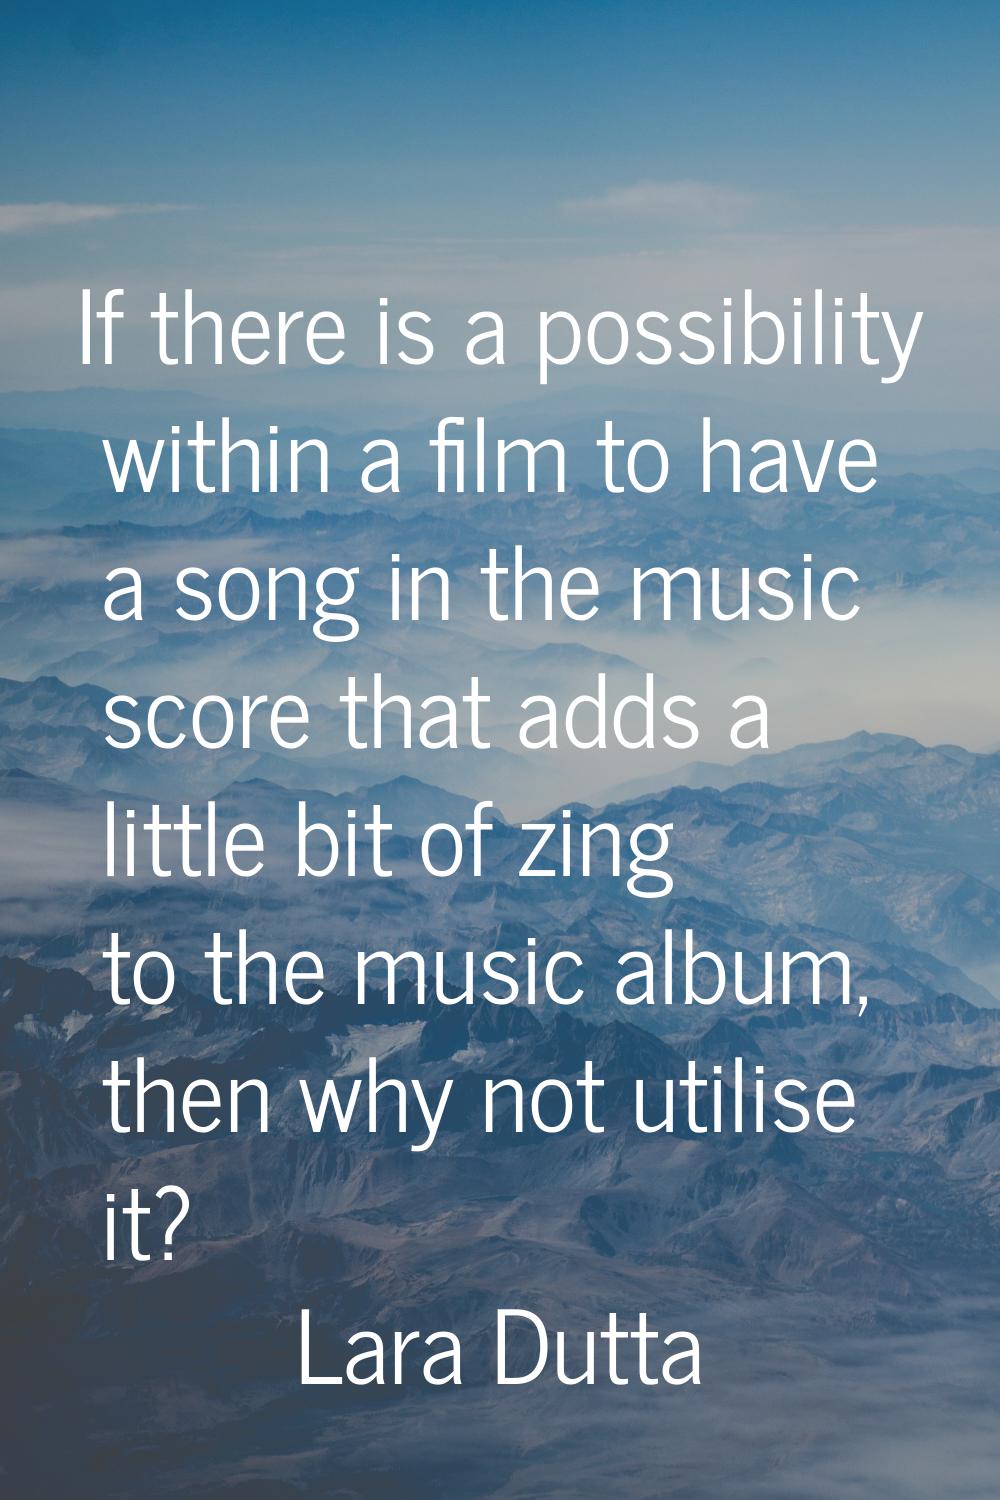 If there is a possibility within a film to have a song in the music score that adds a little bit of